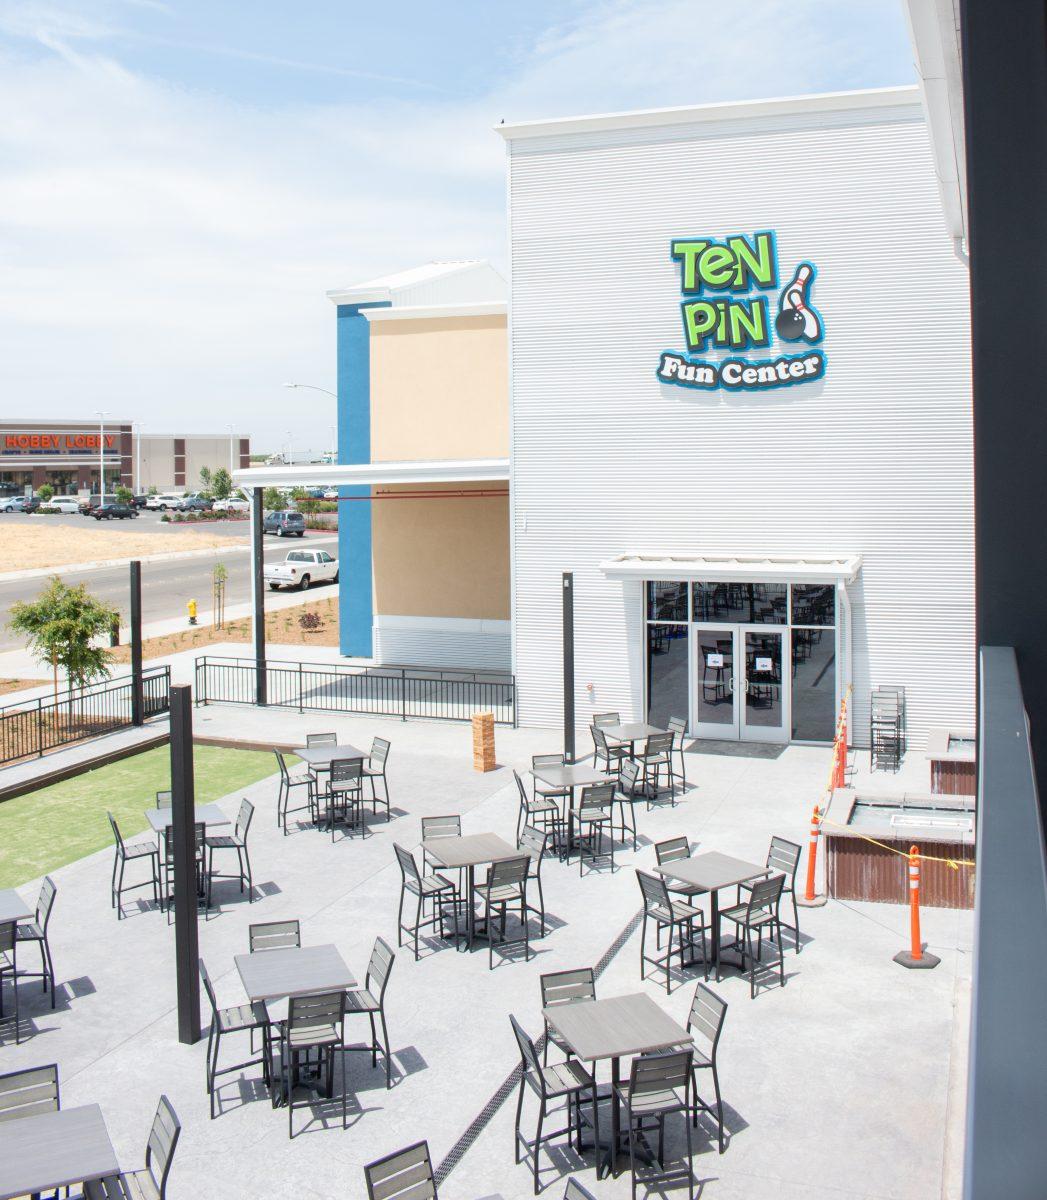 The balcony offers a birds eye view of Ten Pins outdoor beer garden seating. (Signal Photo/ Simarjit Kaur)